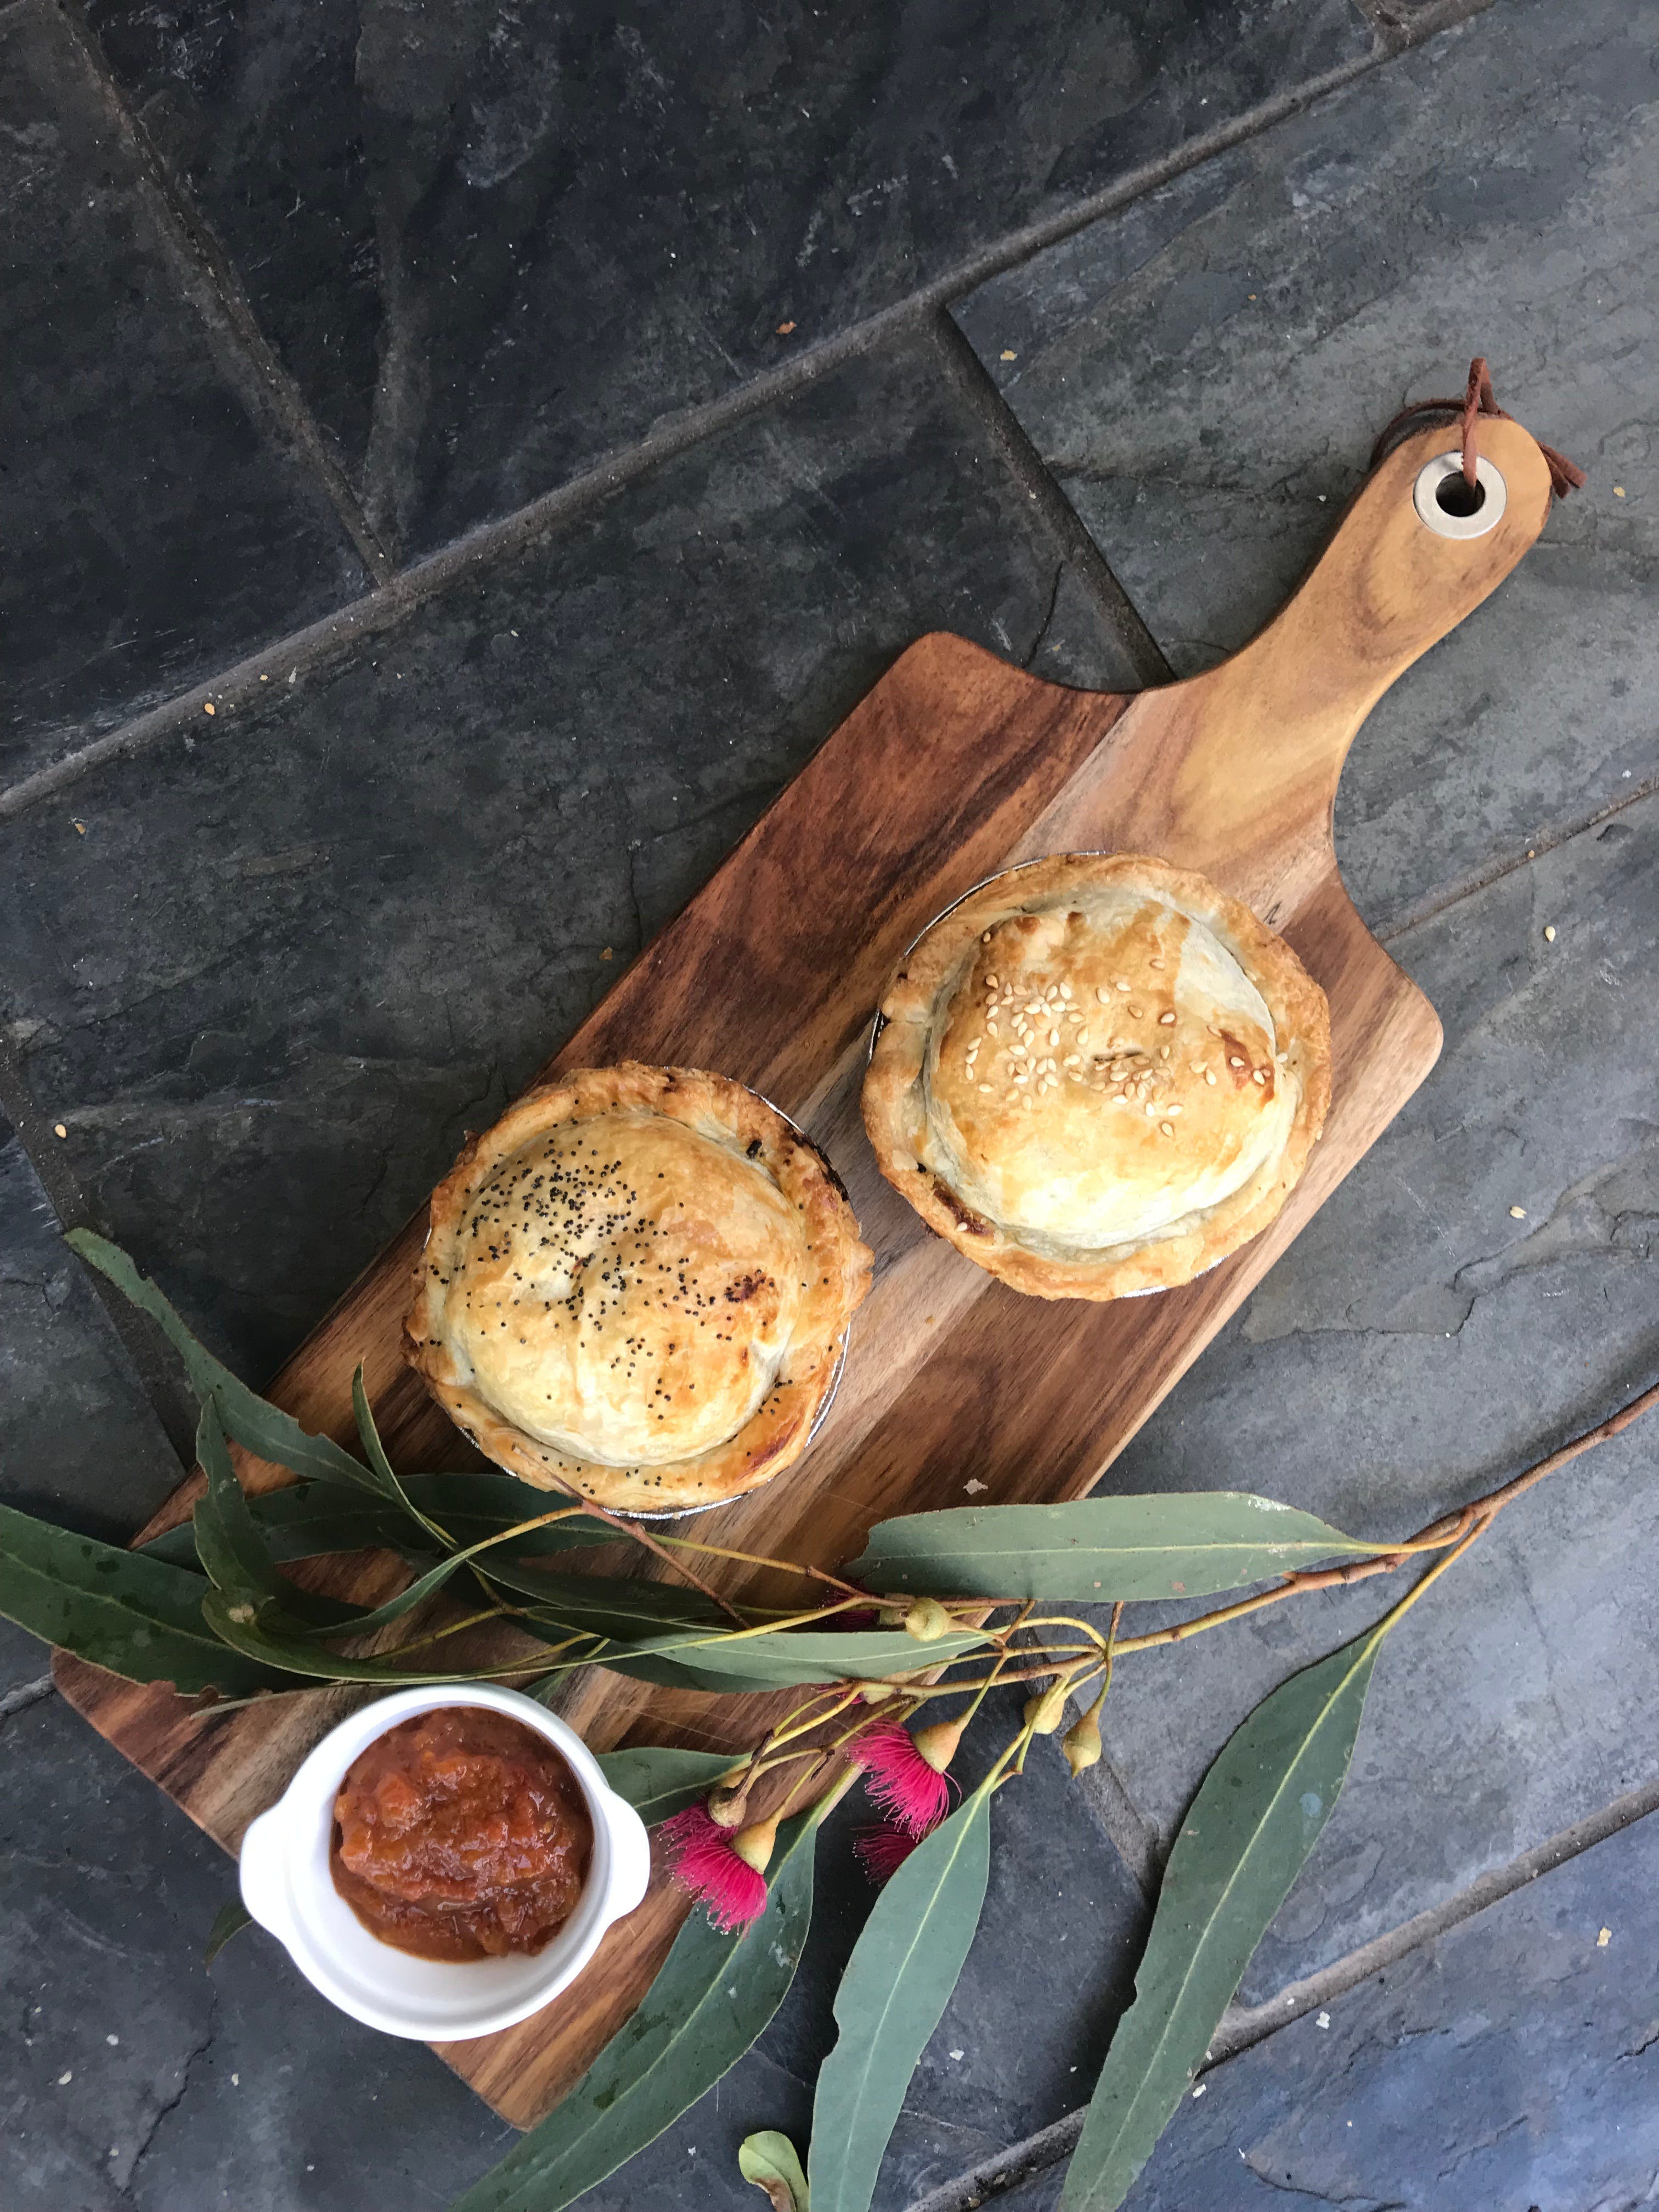 Aged Wine and Vintage Pies - Accommodation Gold Coast